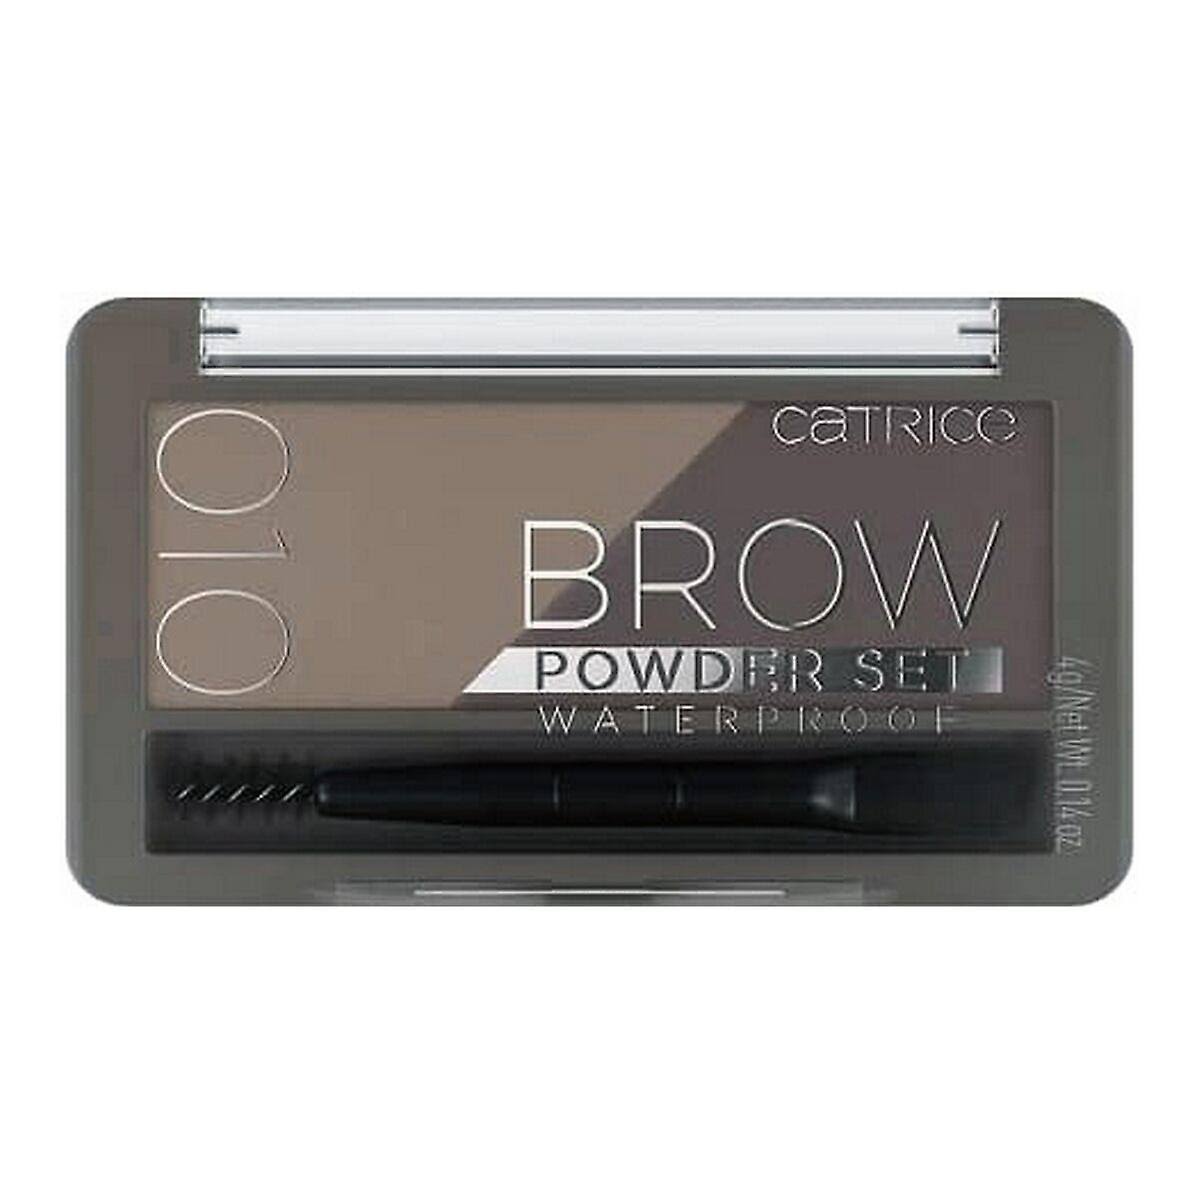 Catrice Brow Powder Set Waterproof Color 010 Ash Blond 4G